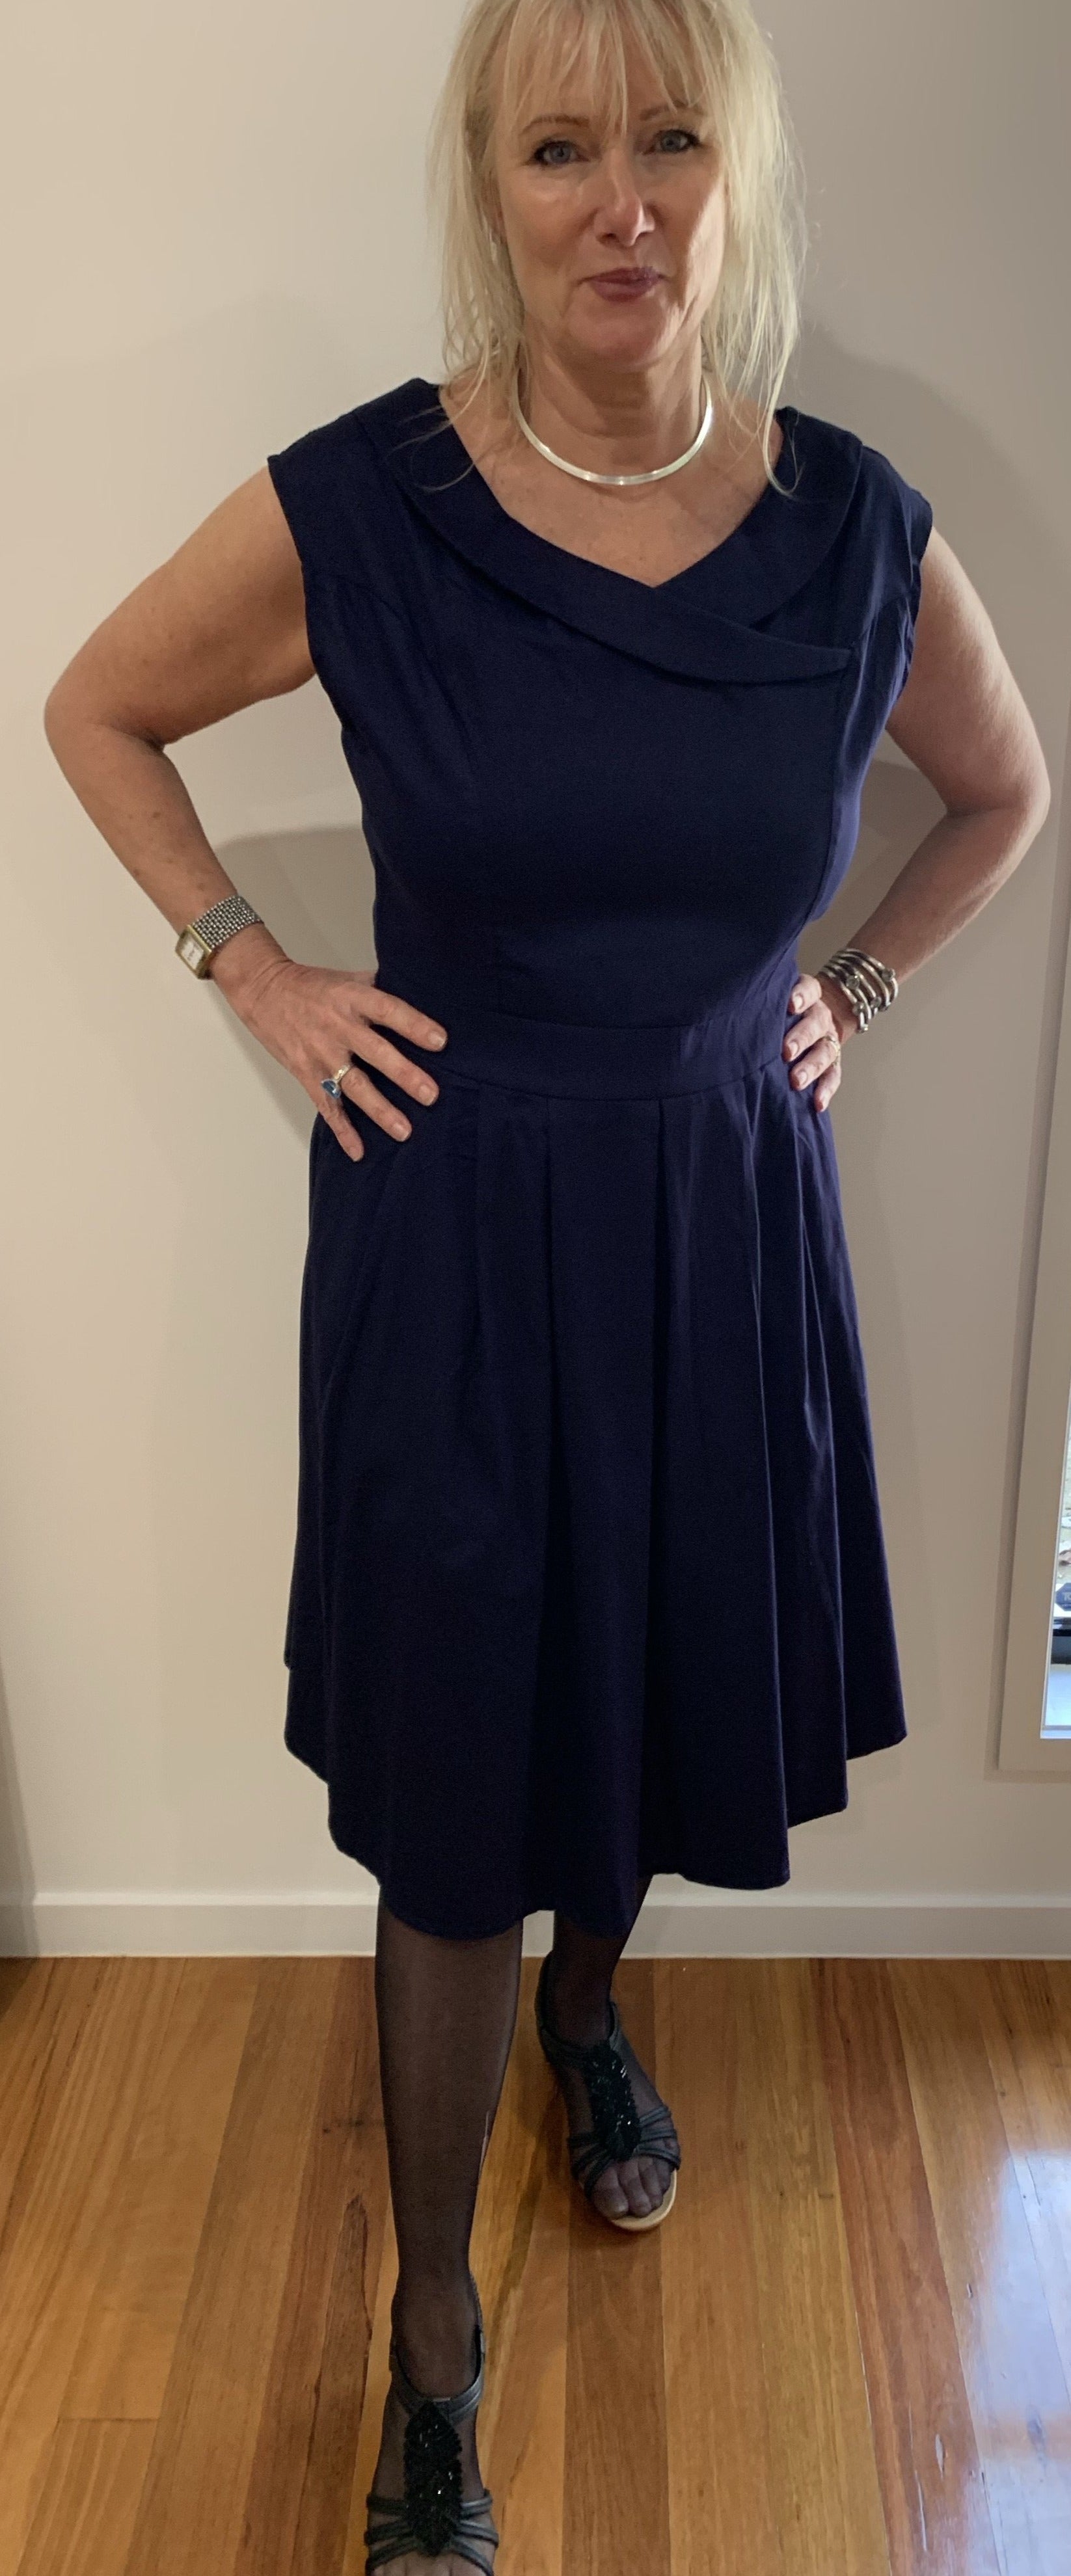 Timeless by Vanessa Tong Classic Navy Vintage/Retro Style Dress